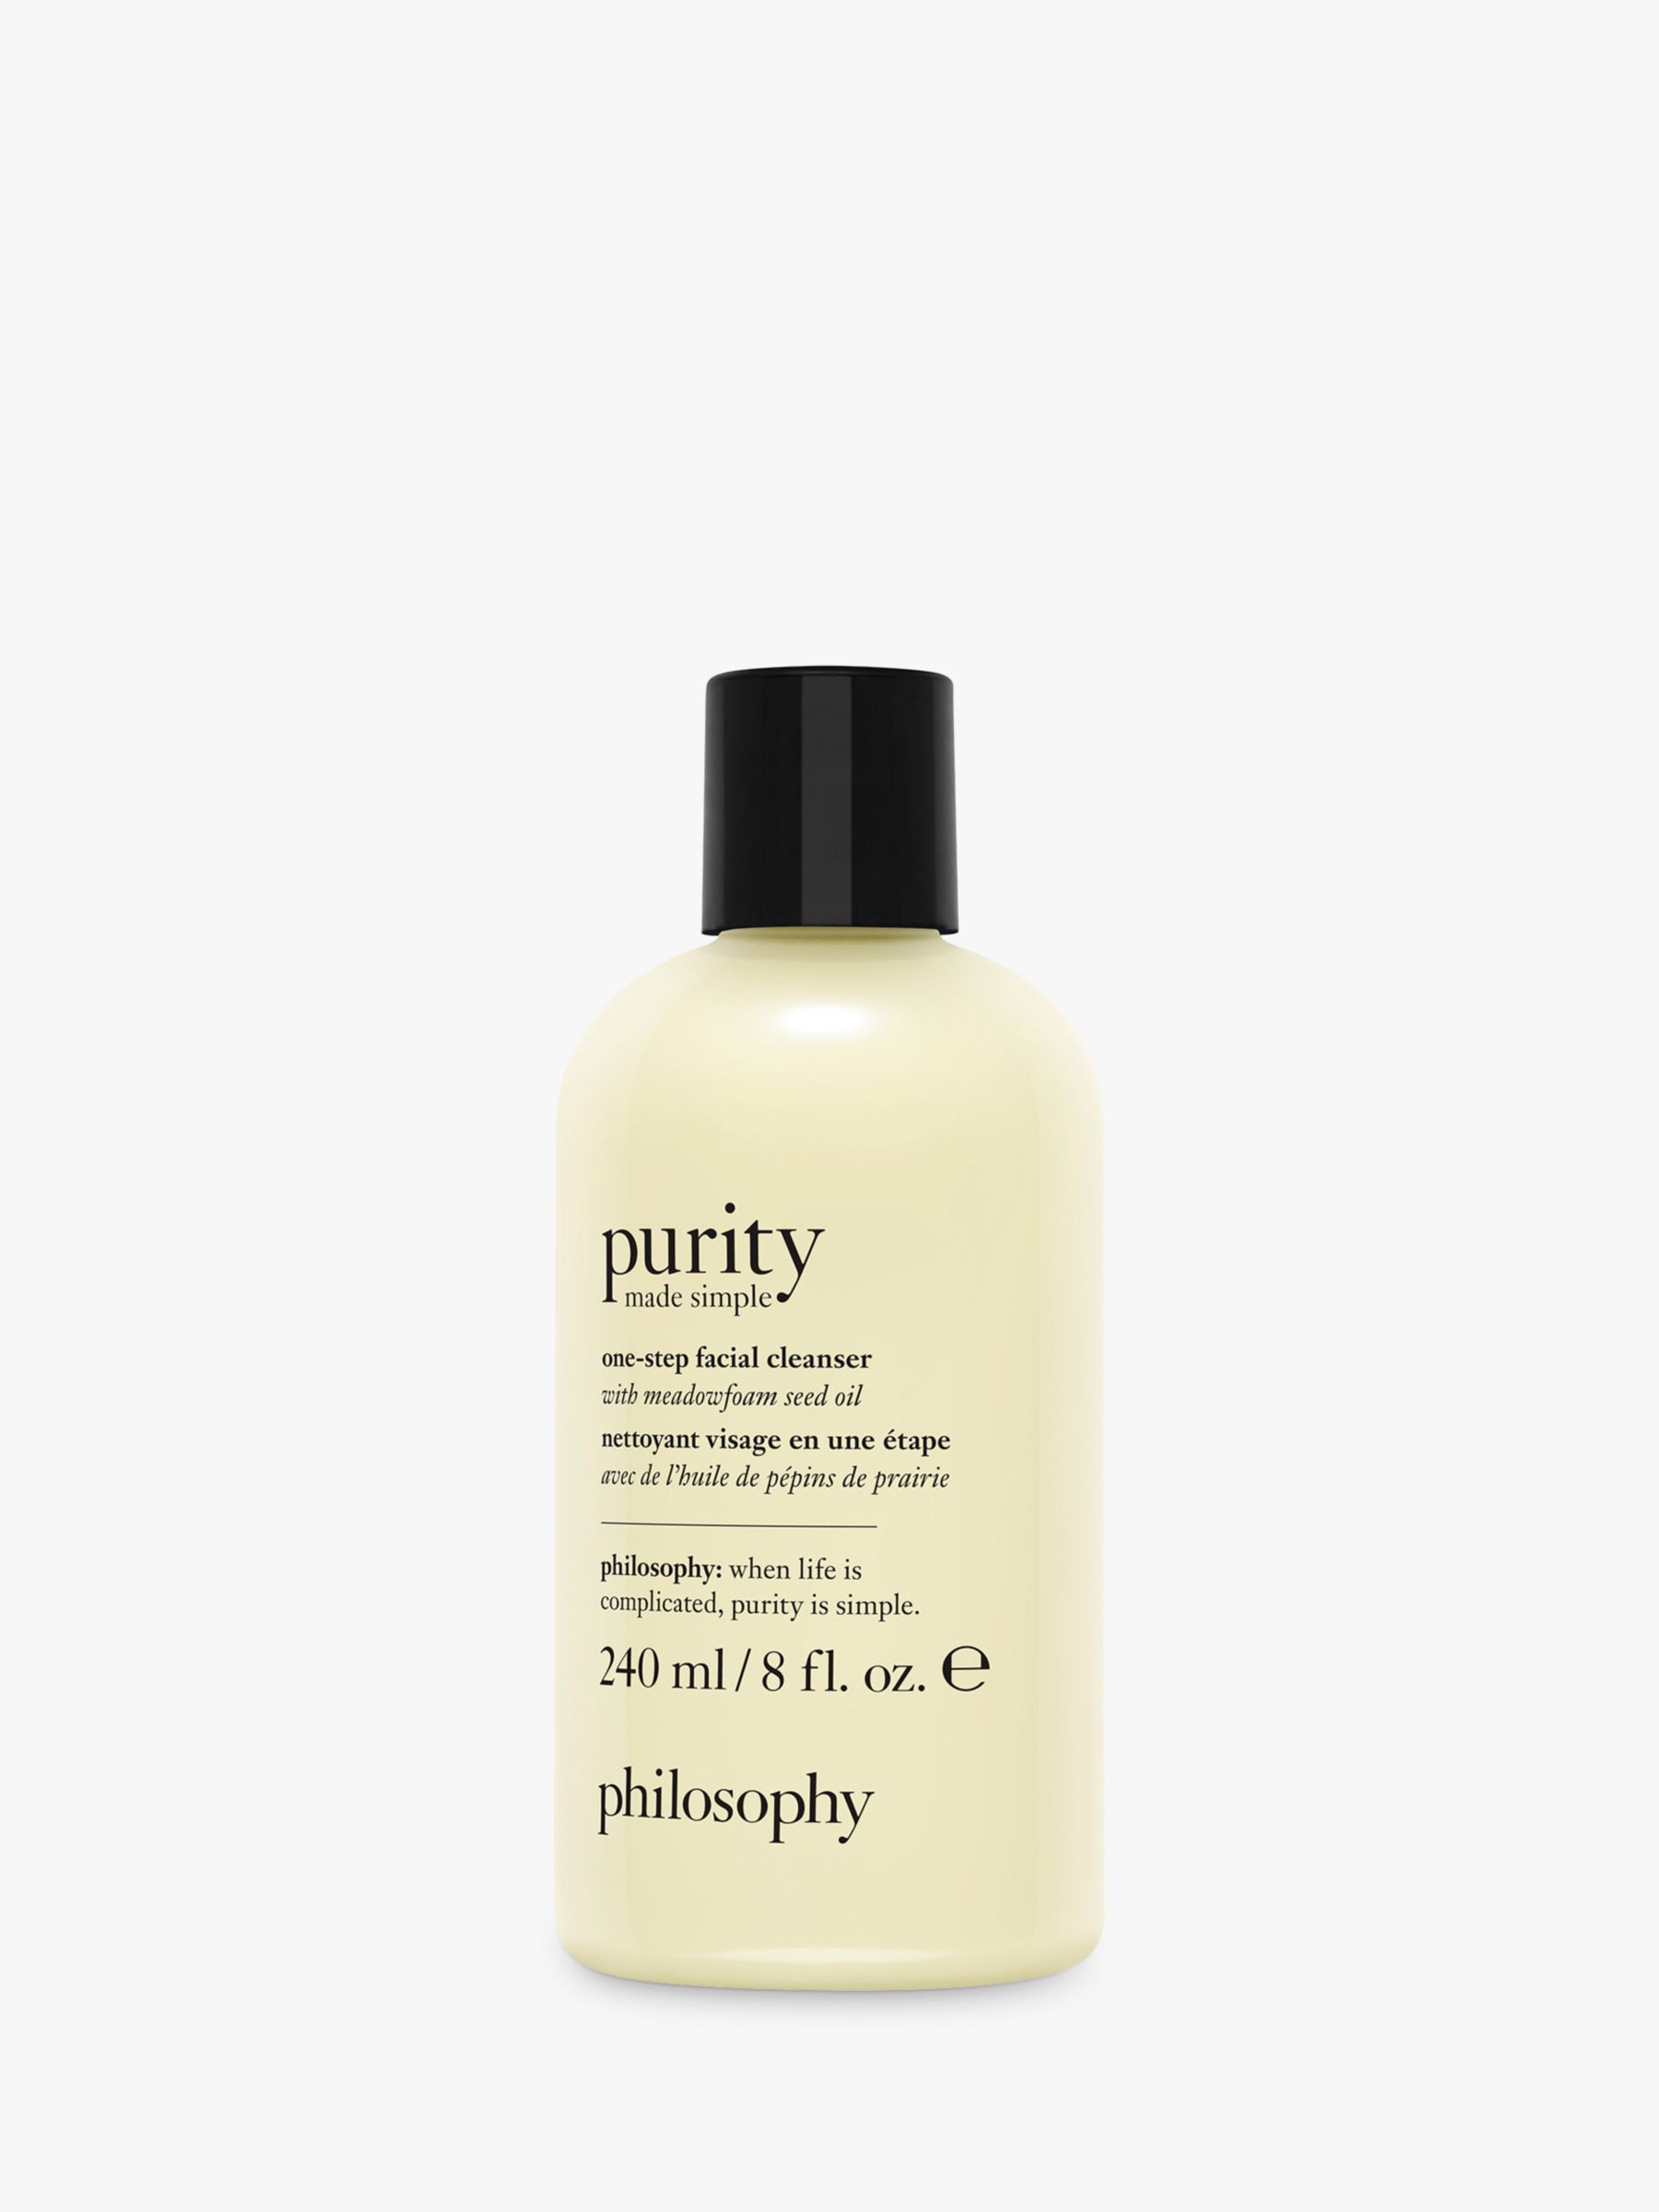 at　John　One-Step　240ml　Cleanser,　Philosophy　Purity　Facial　Simple　Made　Partners　Lewis　amp;